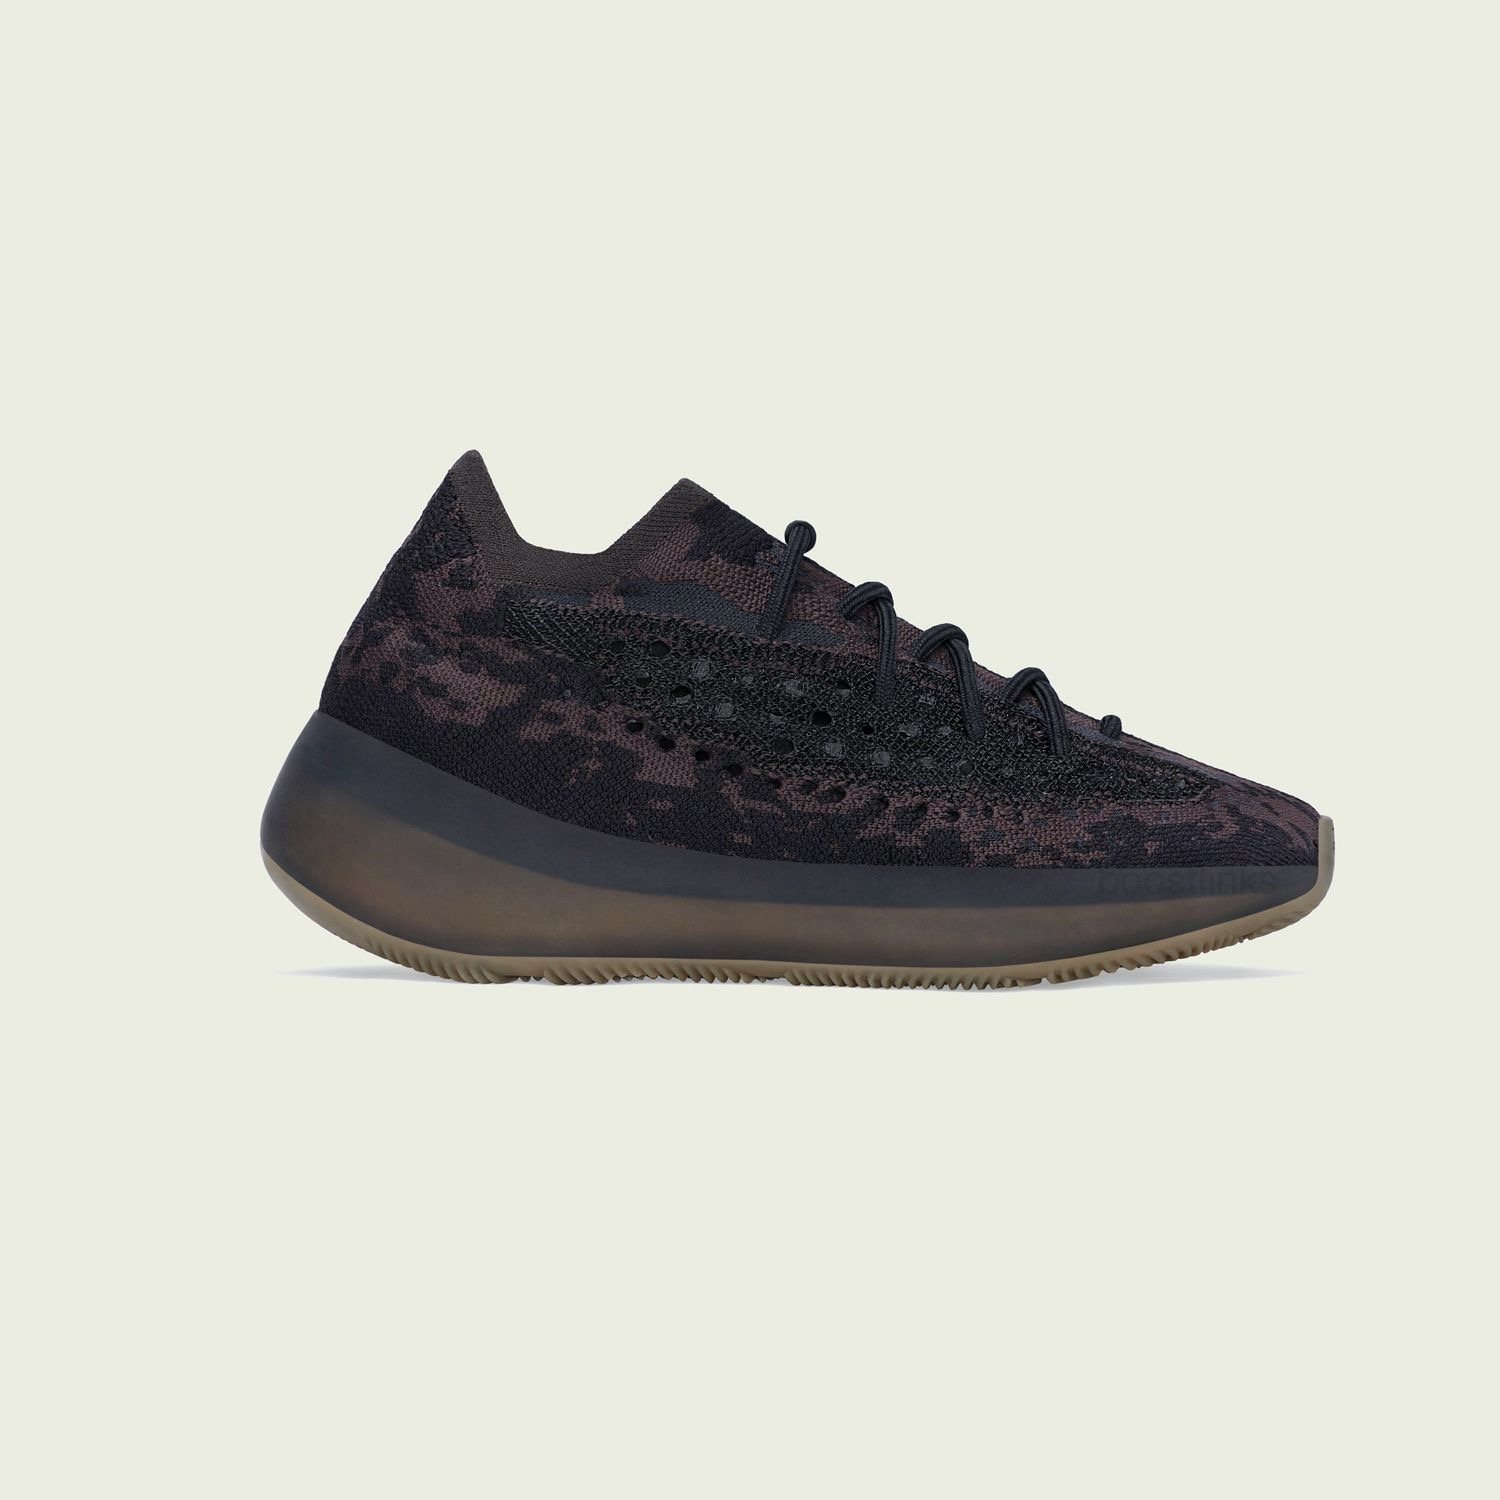 Official Look At The Adidas Yeezy Boost 380 “Onyx”